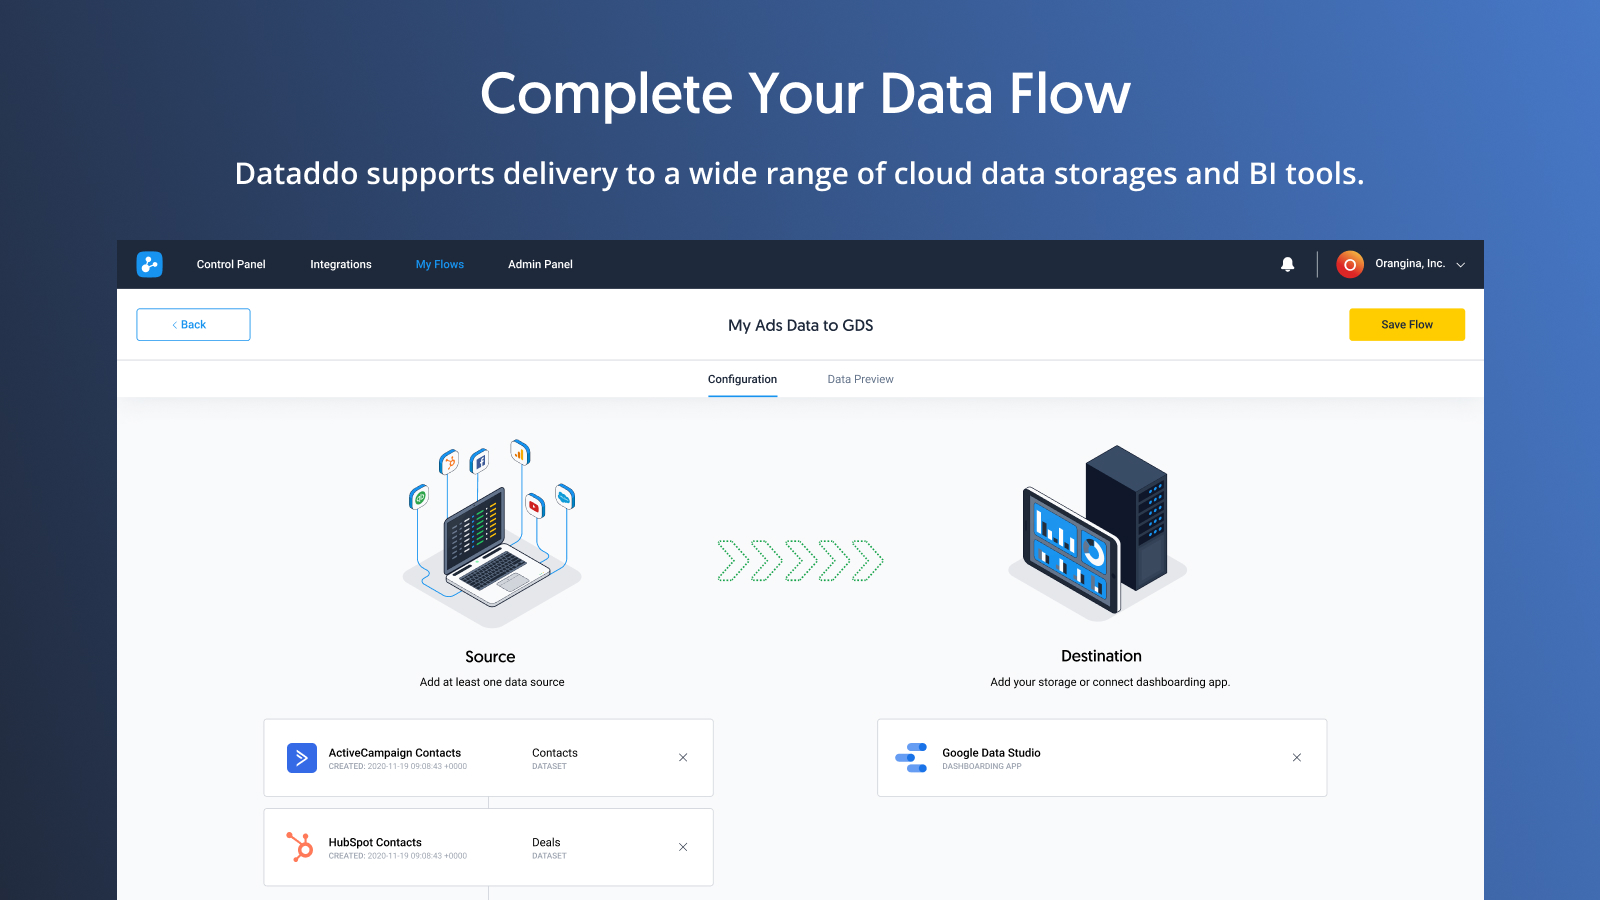 Dataddo supports delivery to a wide range of cloud data storages and BI tools, such as Google BigQuery, Snowflake, Power BI, Tableau, and Google Data Studio.